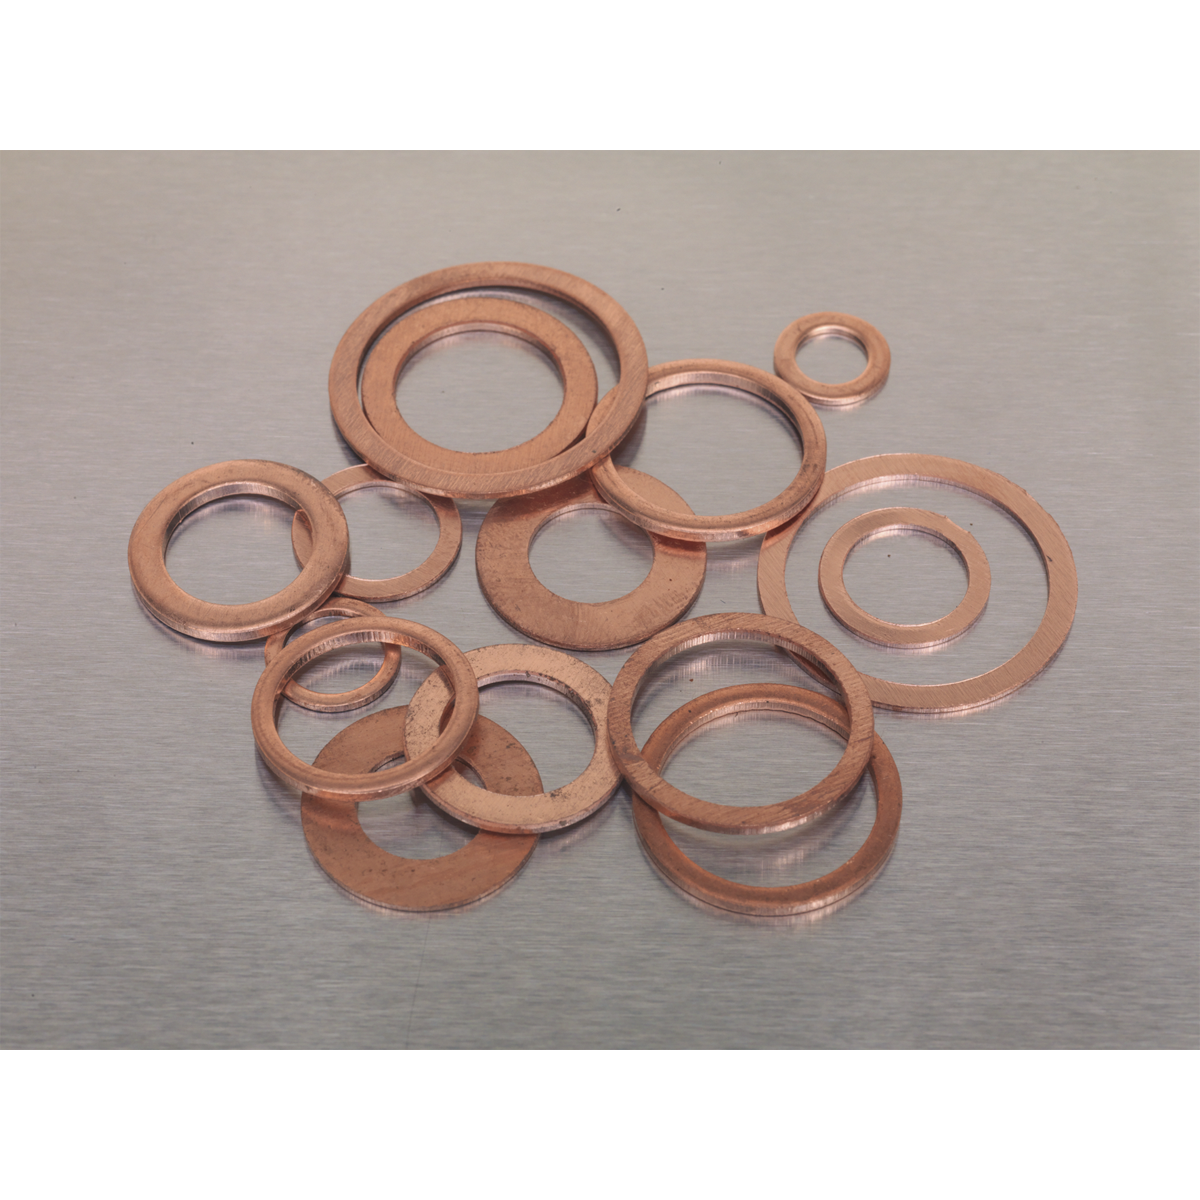 Sealey 250pc Diesel Injector Copper Washer Assortment - Metric AB027CW